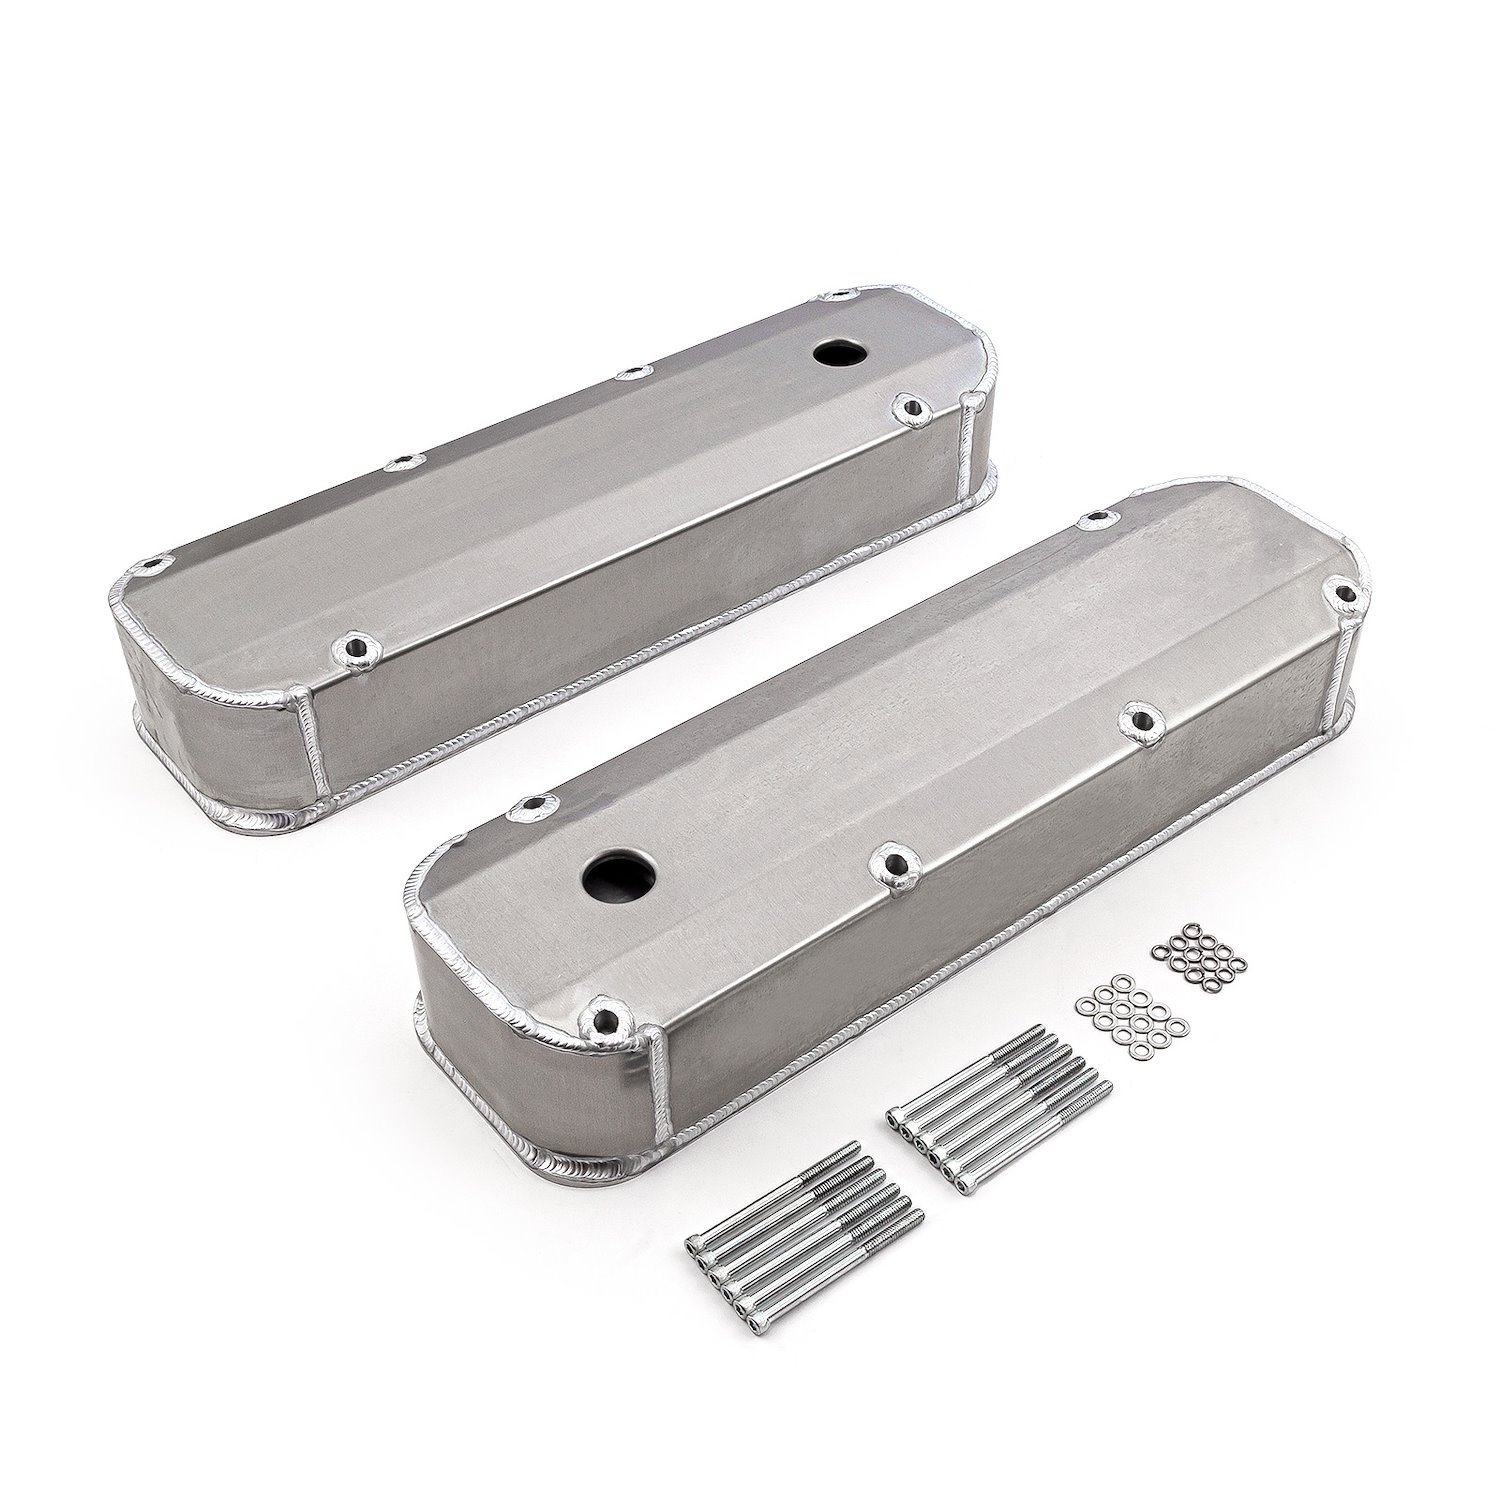 PCE314.1208.01 Ford BBF 429 460 Satin Long Bolt Fabricated Valve Covers - Tall w/ Hole